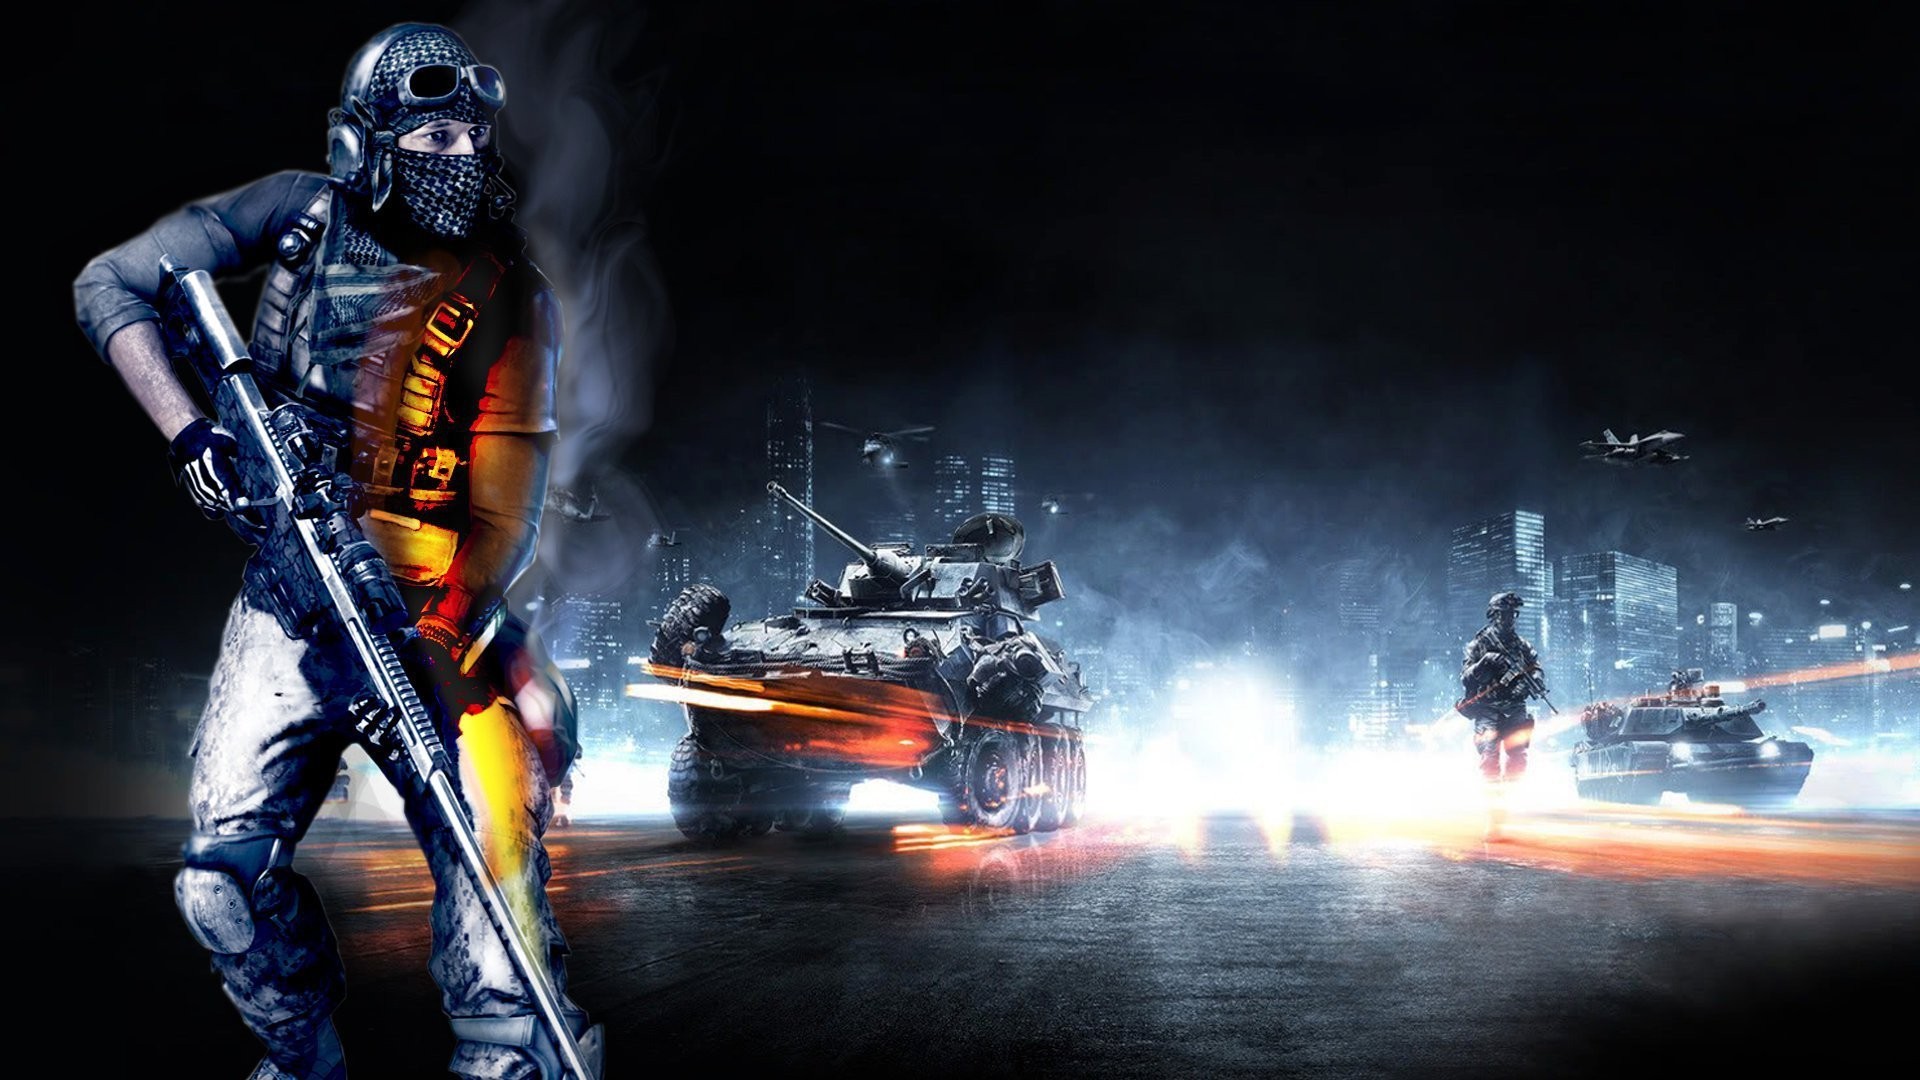 bf3 wallpaper,darkness,performance,musician,performing arts,fictional character